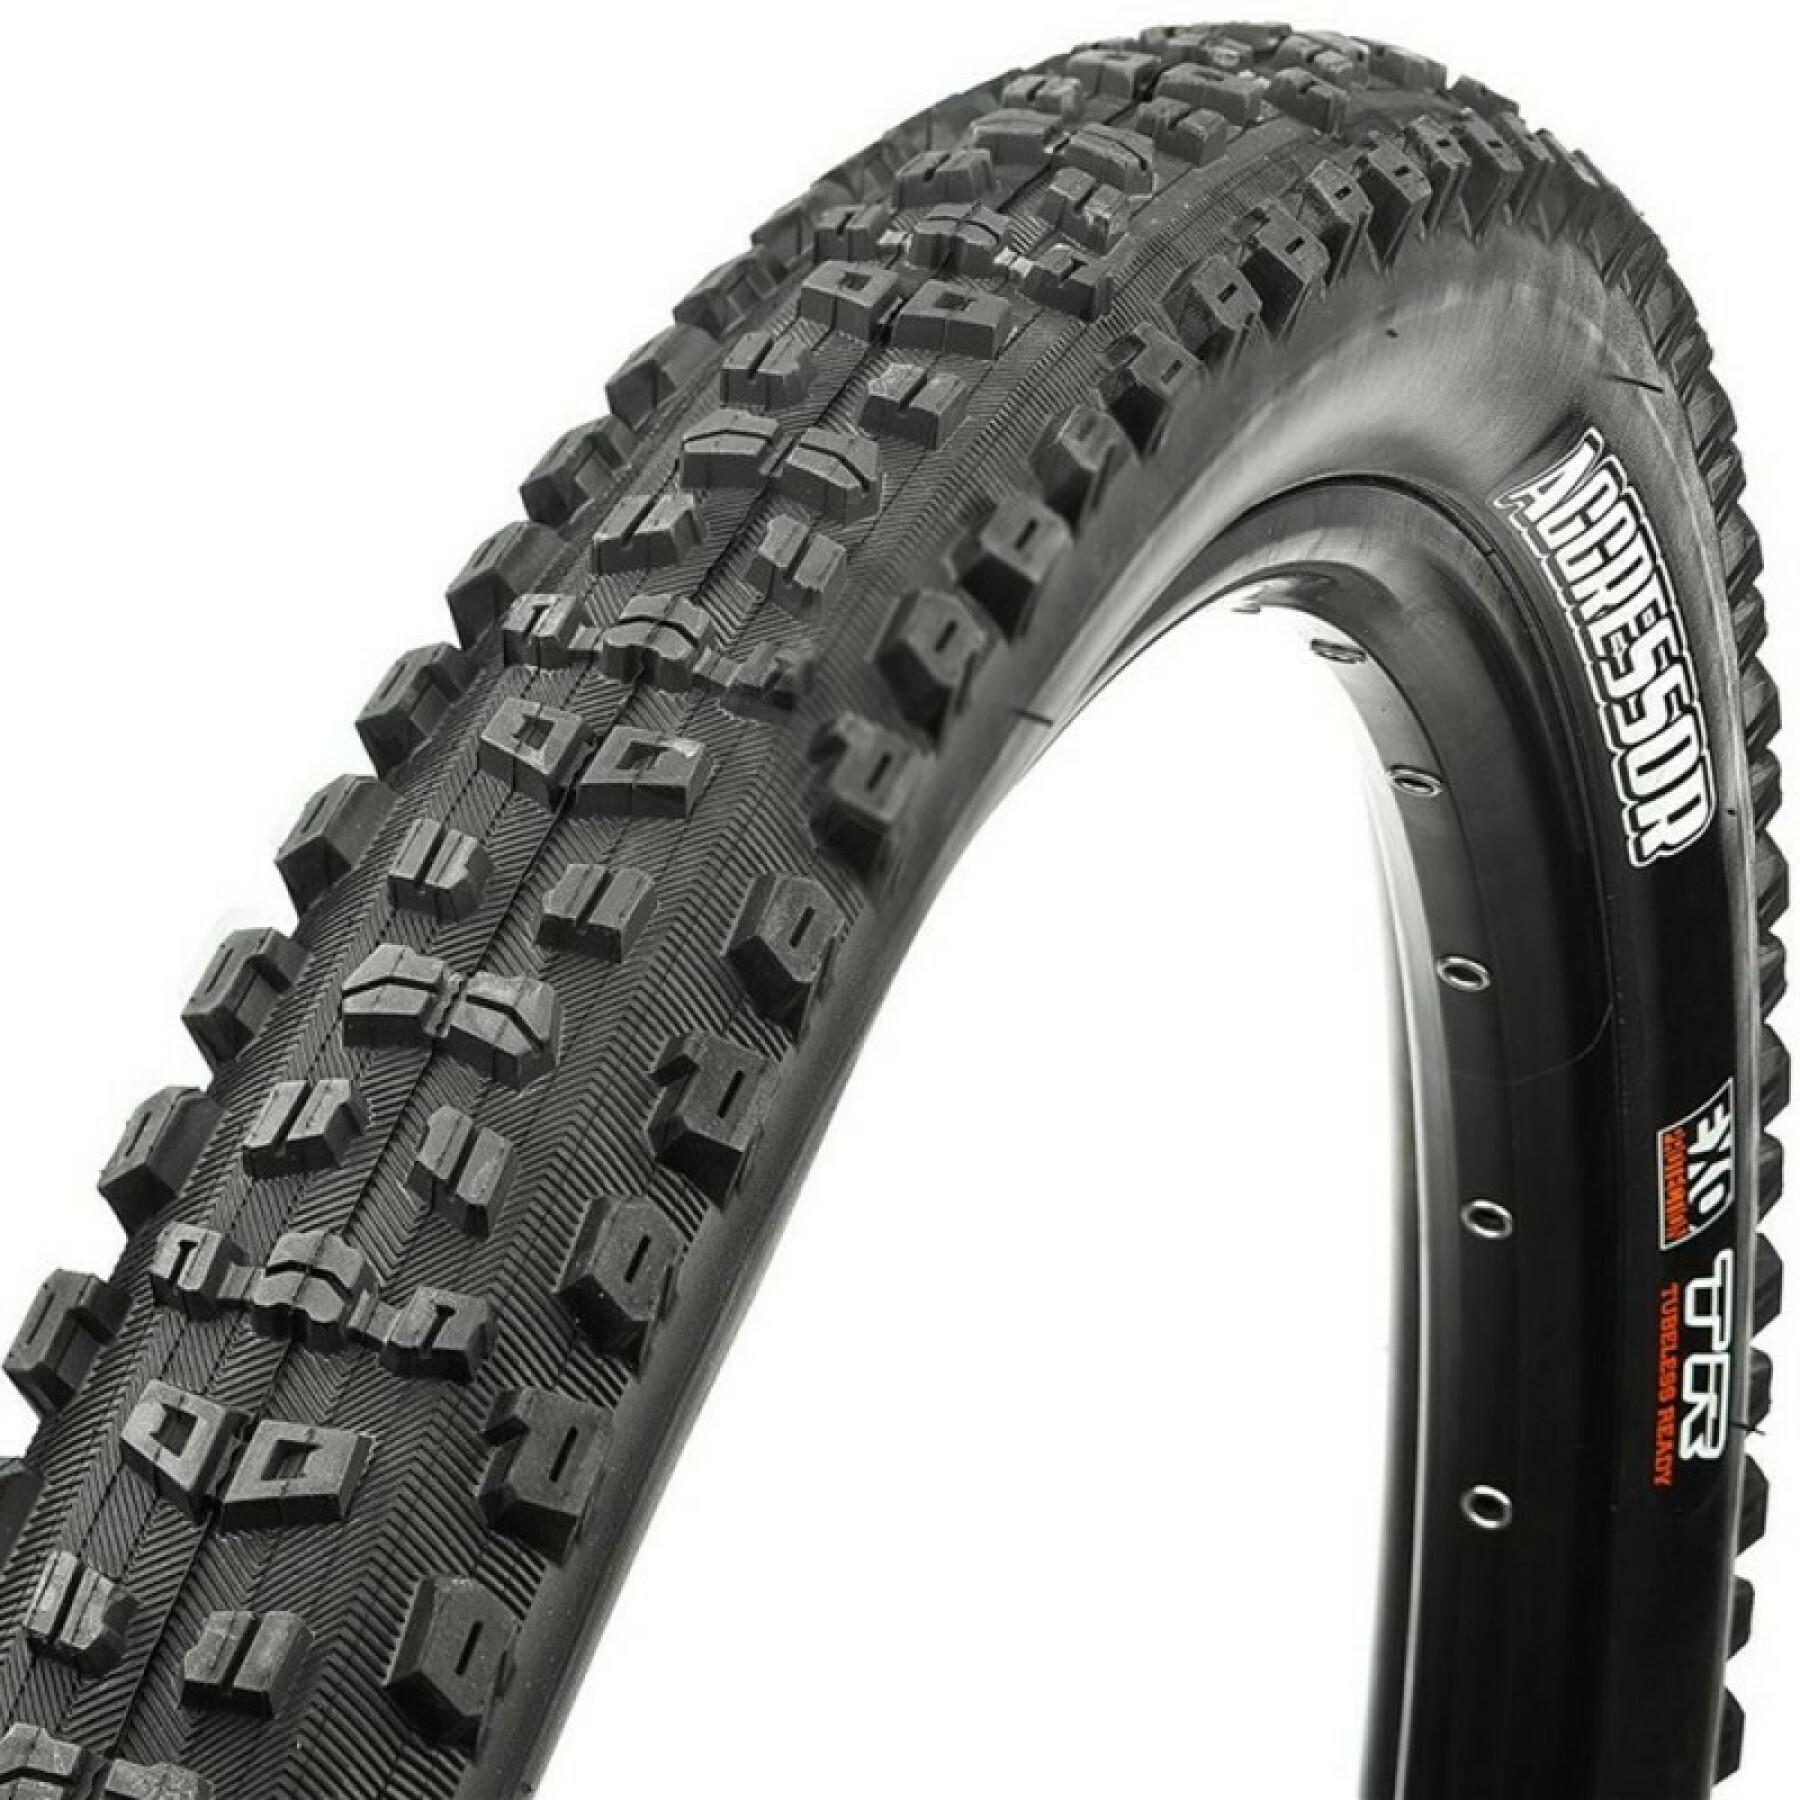 Tubeless soft tire Maxxis Aggressor Exo Double Down